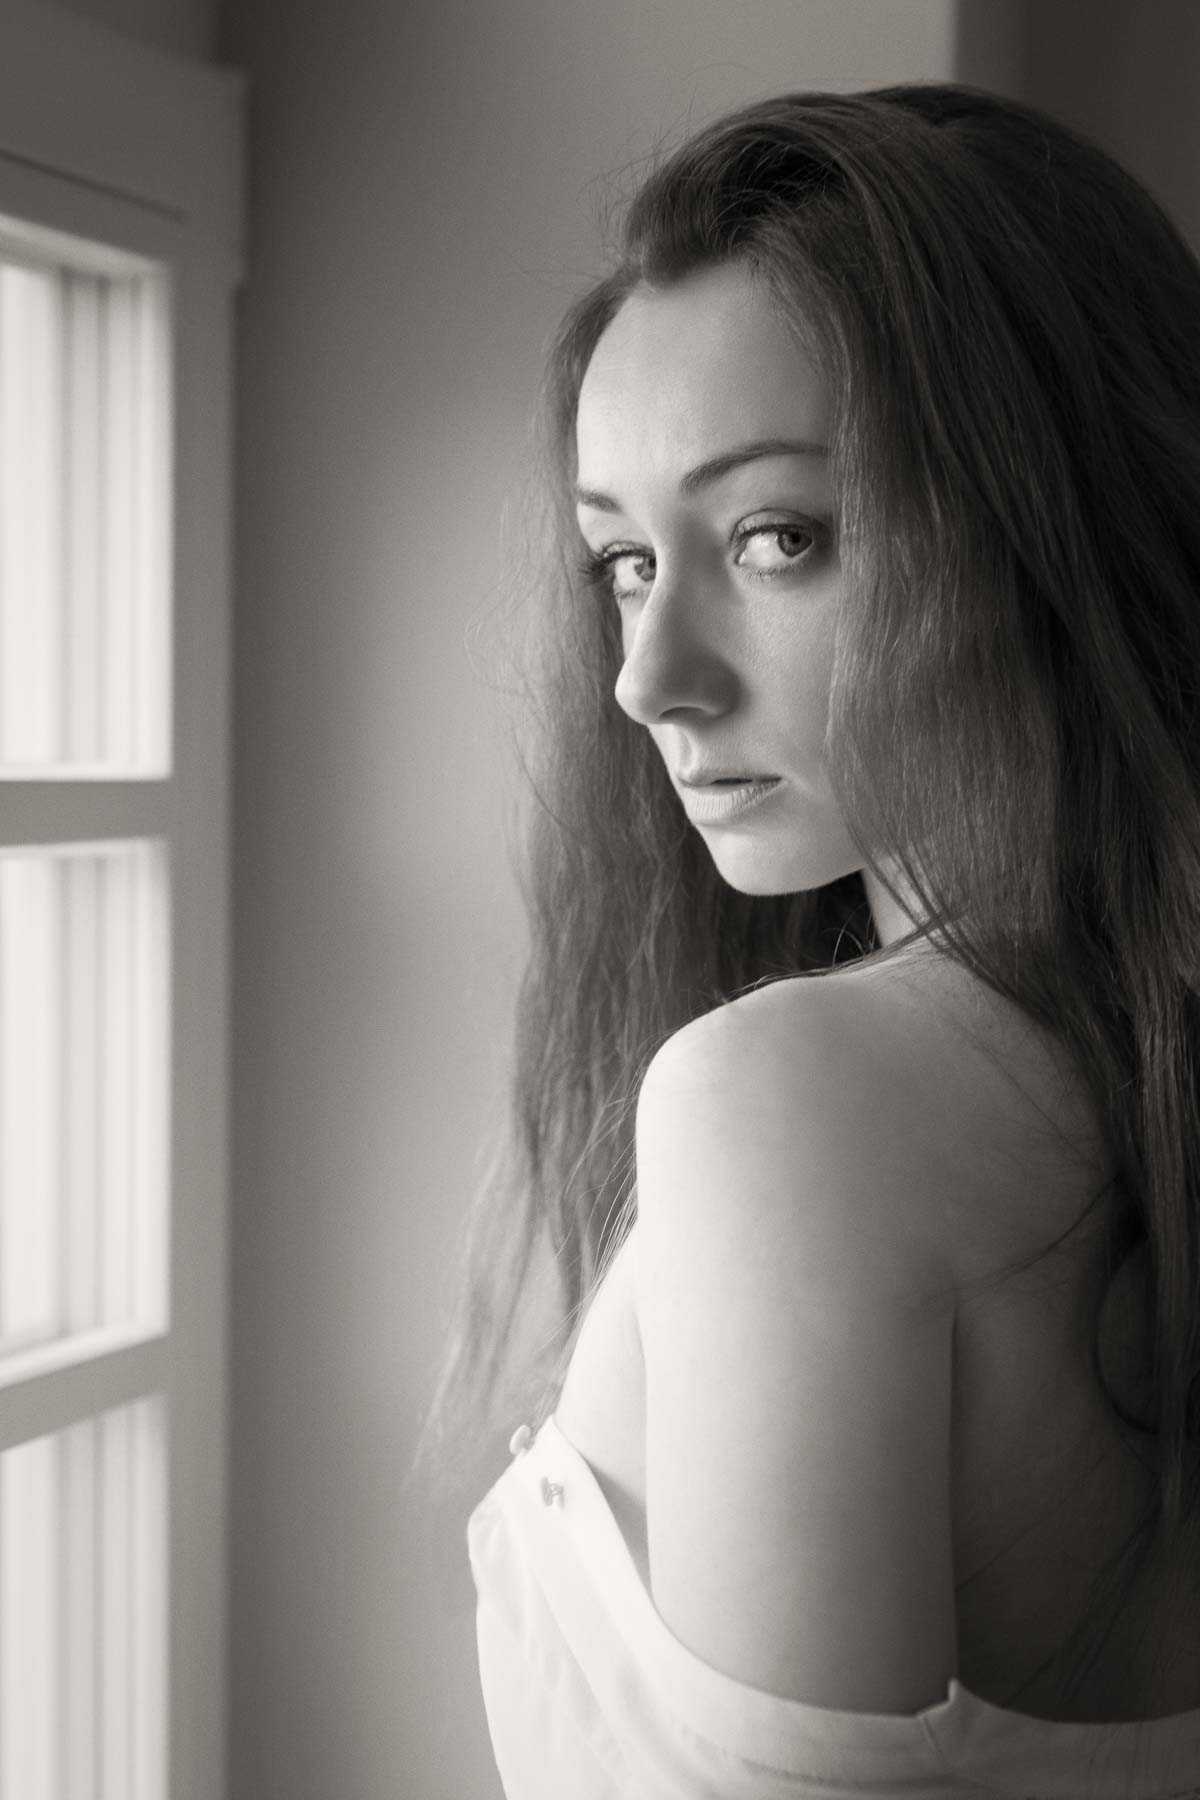 I tried to also make one black and white portrait from the shoot - but with some sepia tone. Photo: John Einar Sandvand